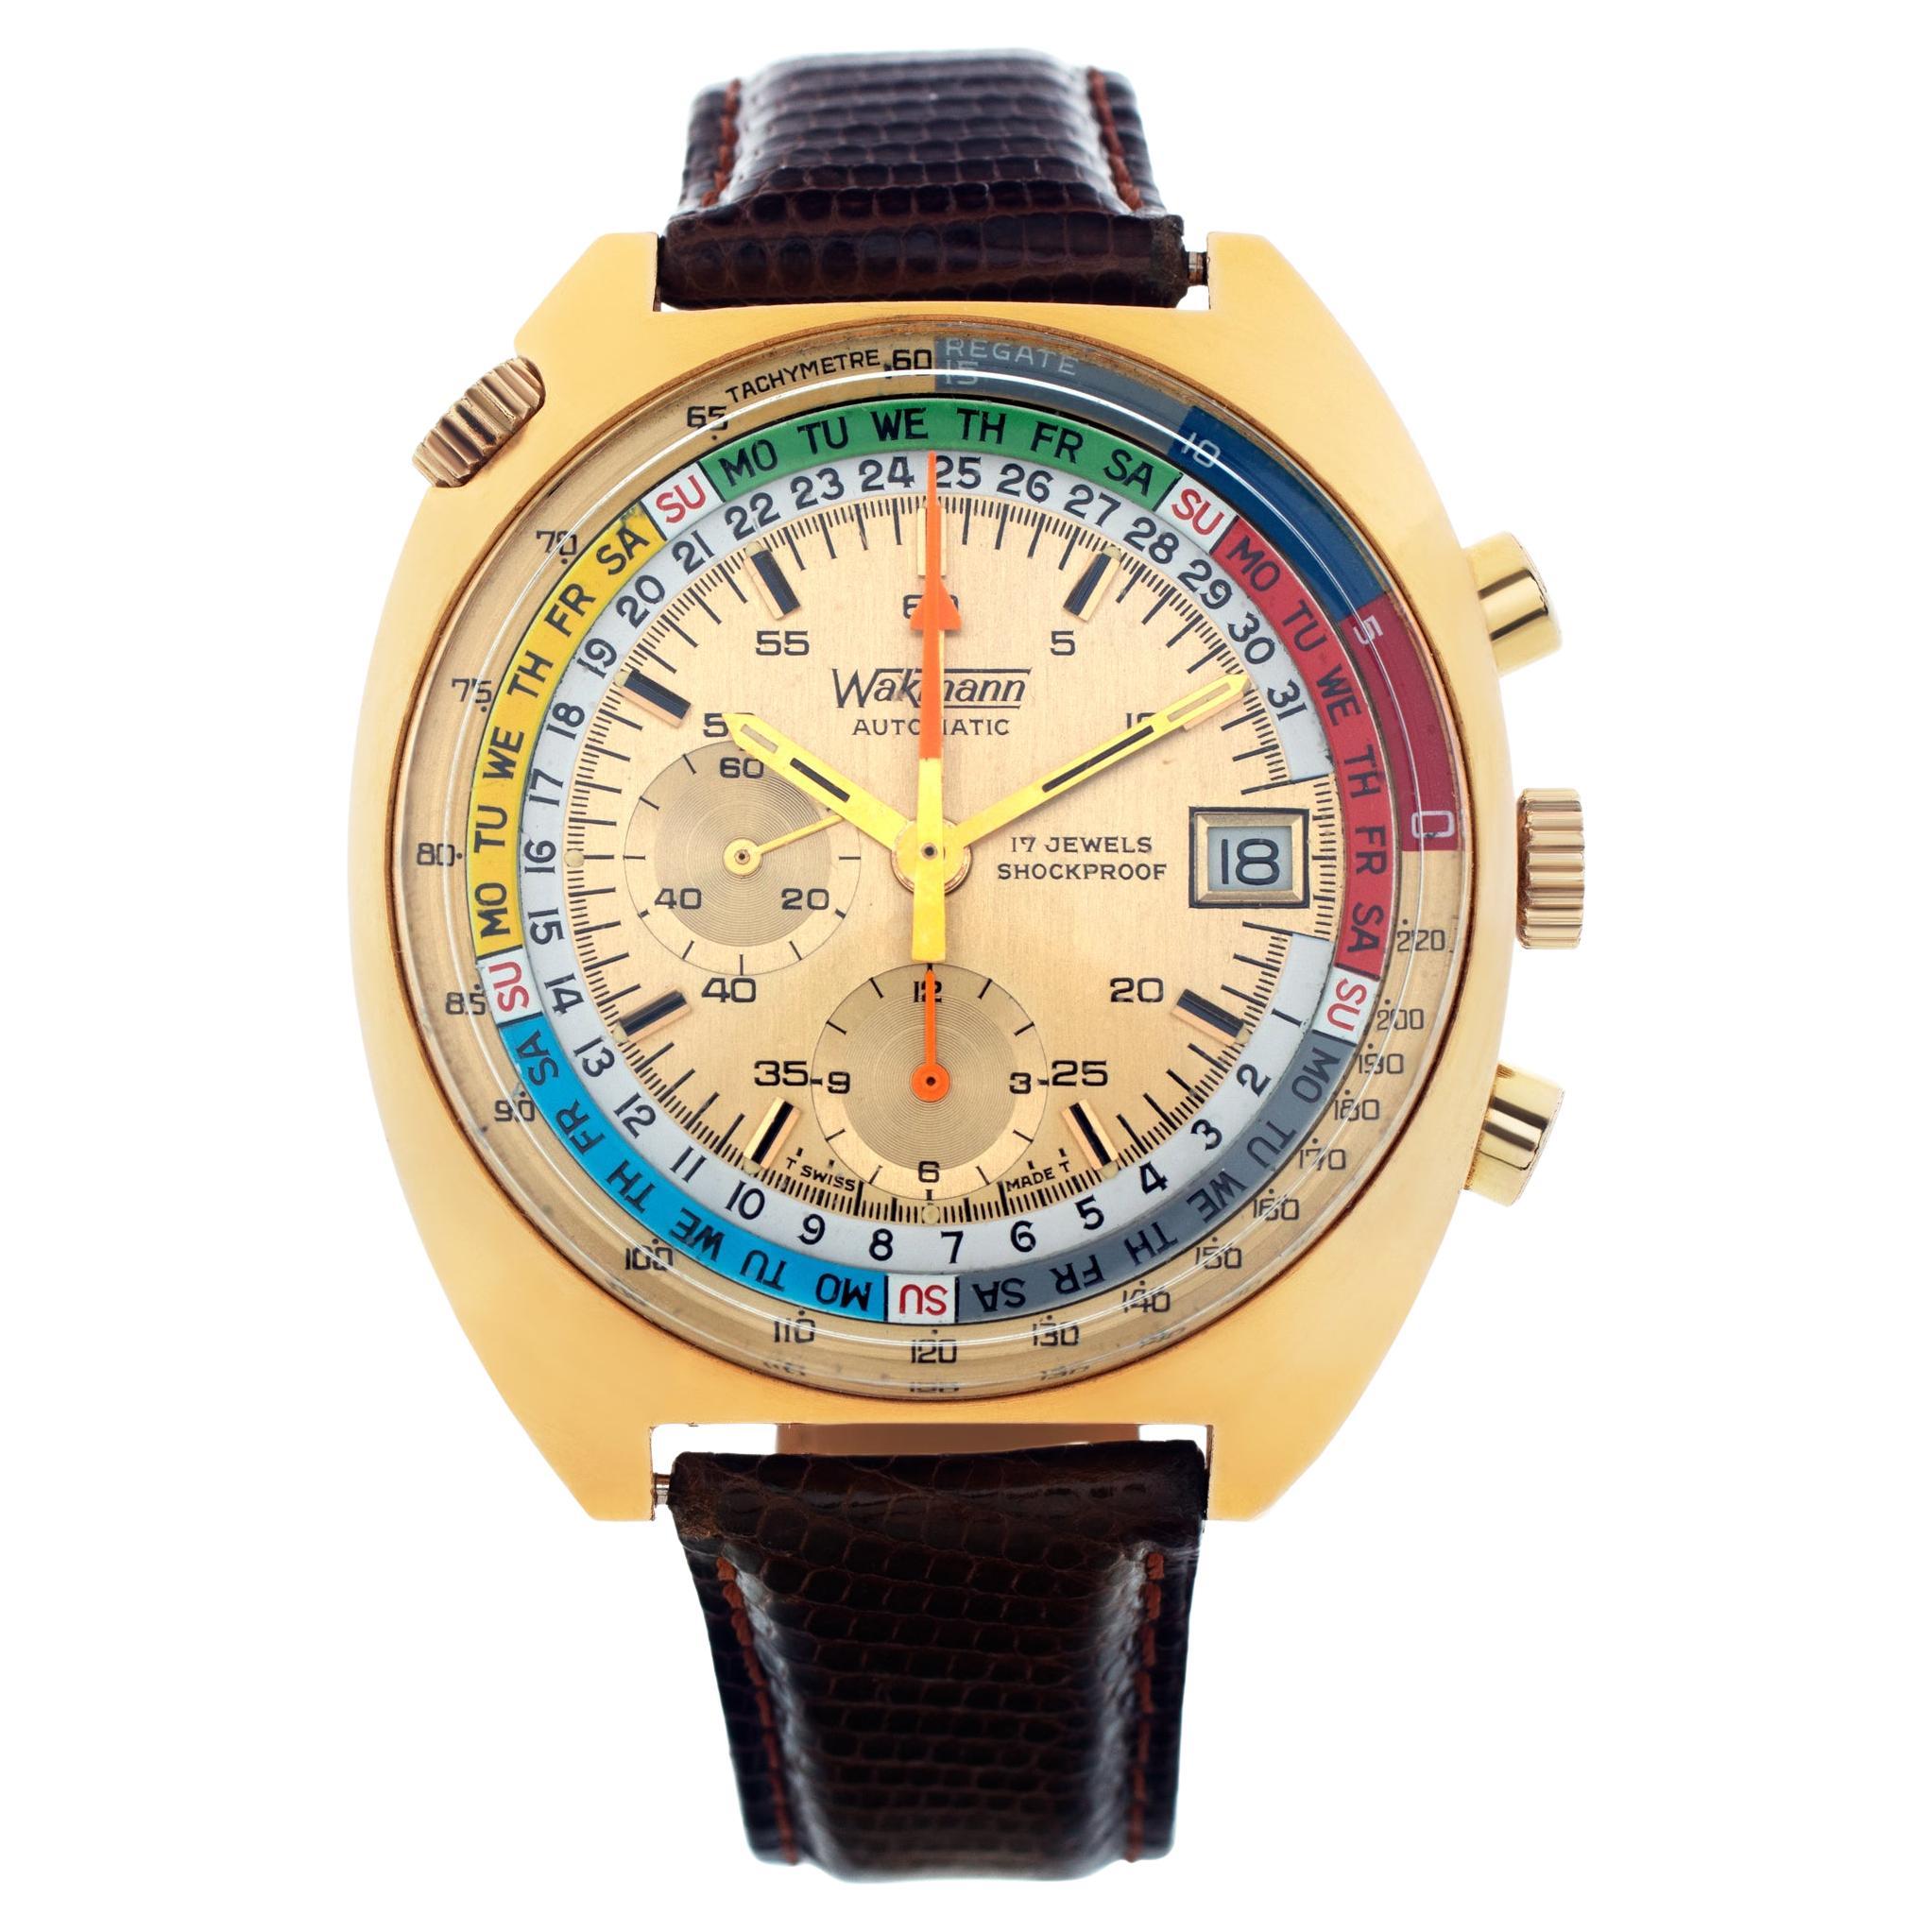 Wakmann Chronograph 1341 Auto Watch Stainless Steel & Gold Plated 